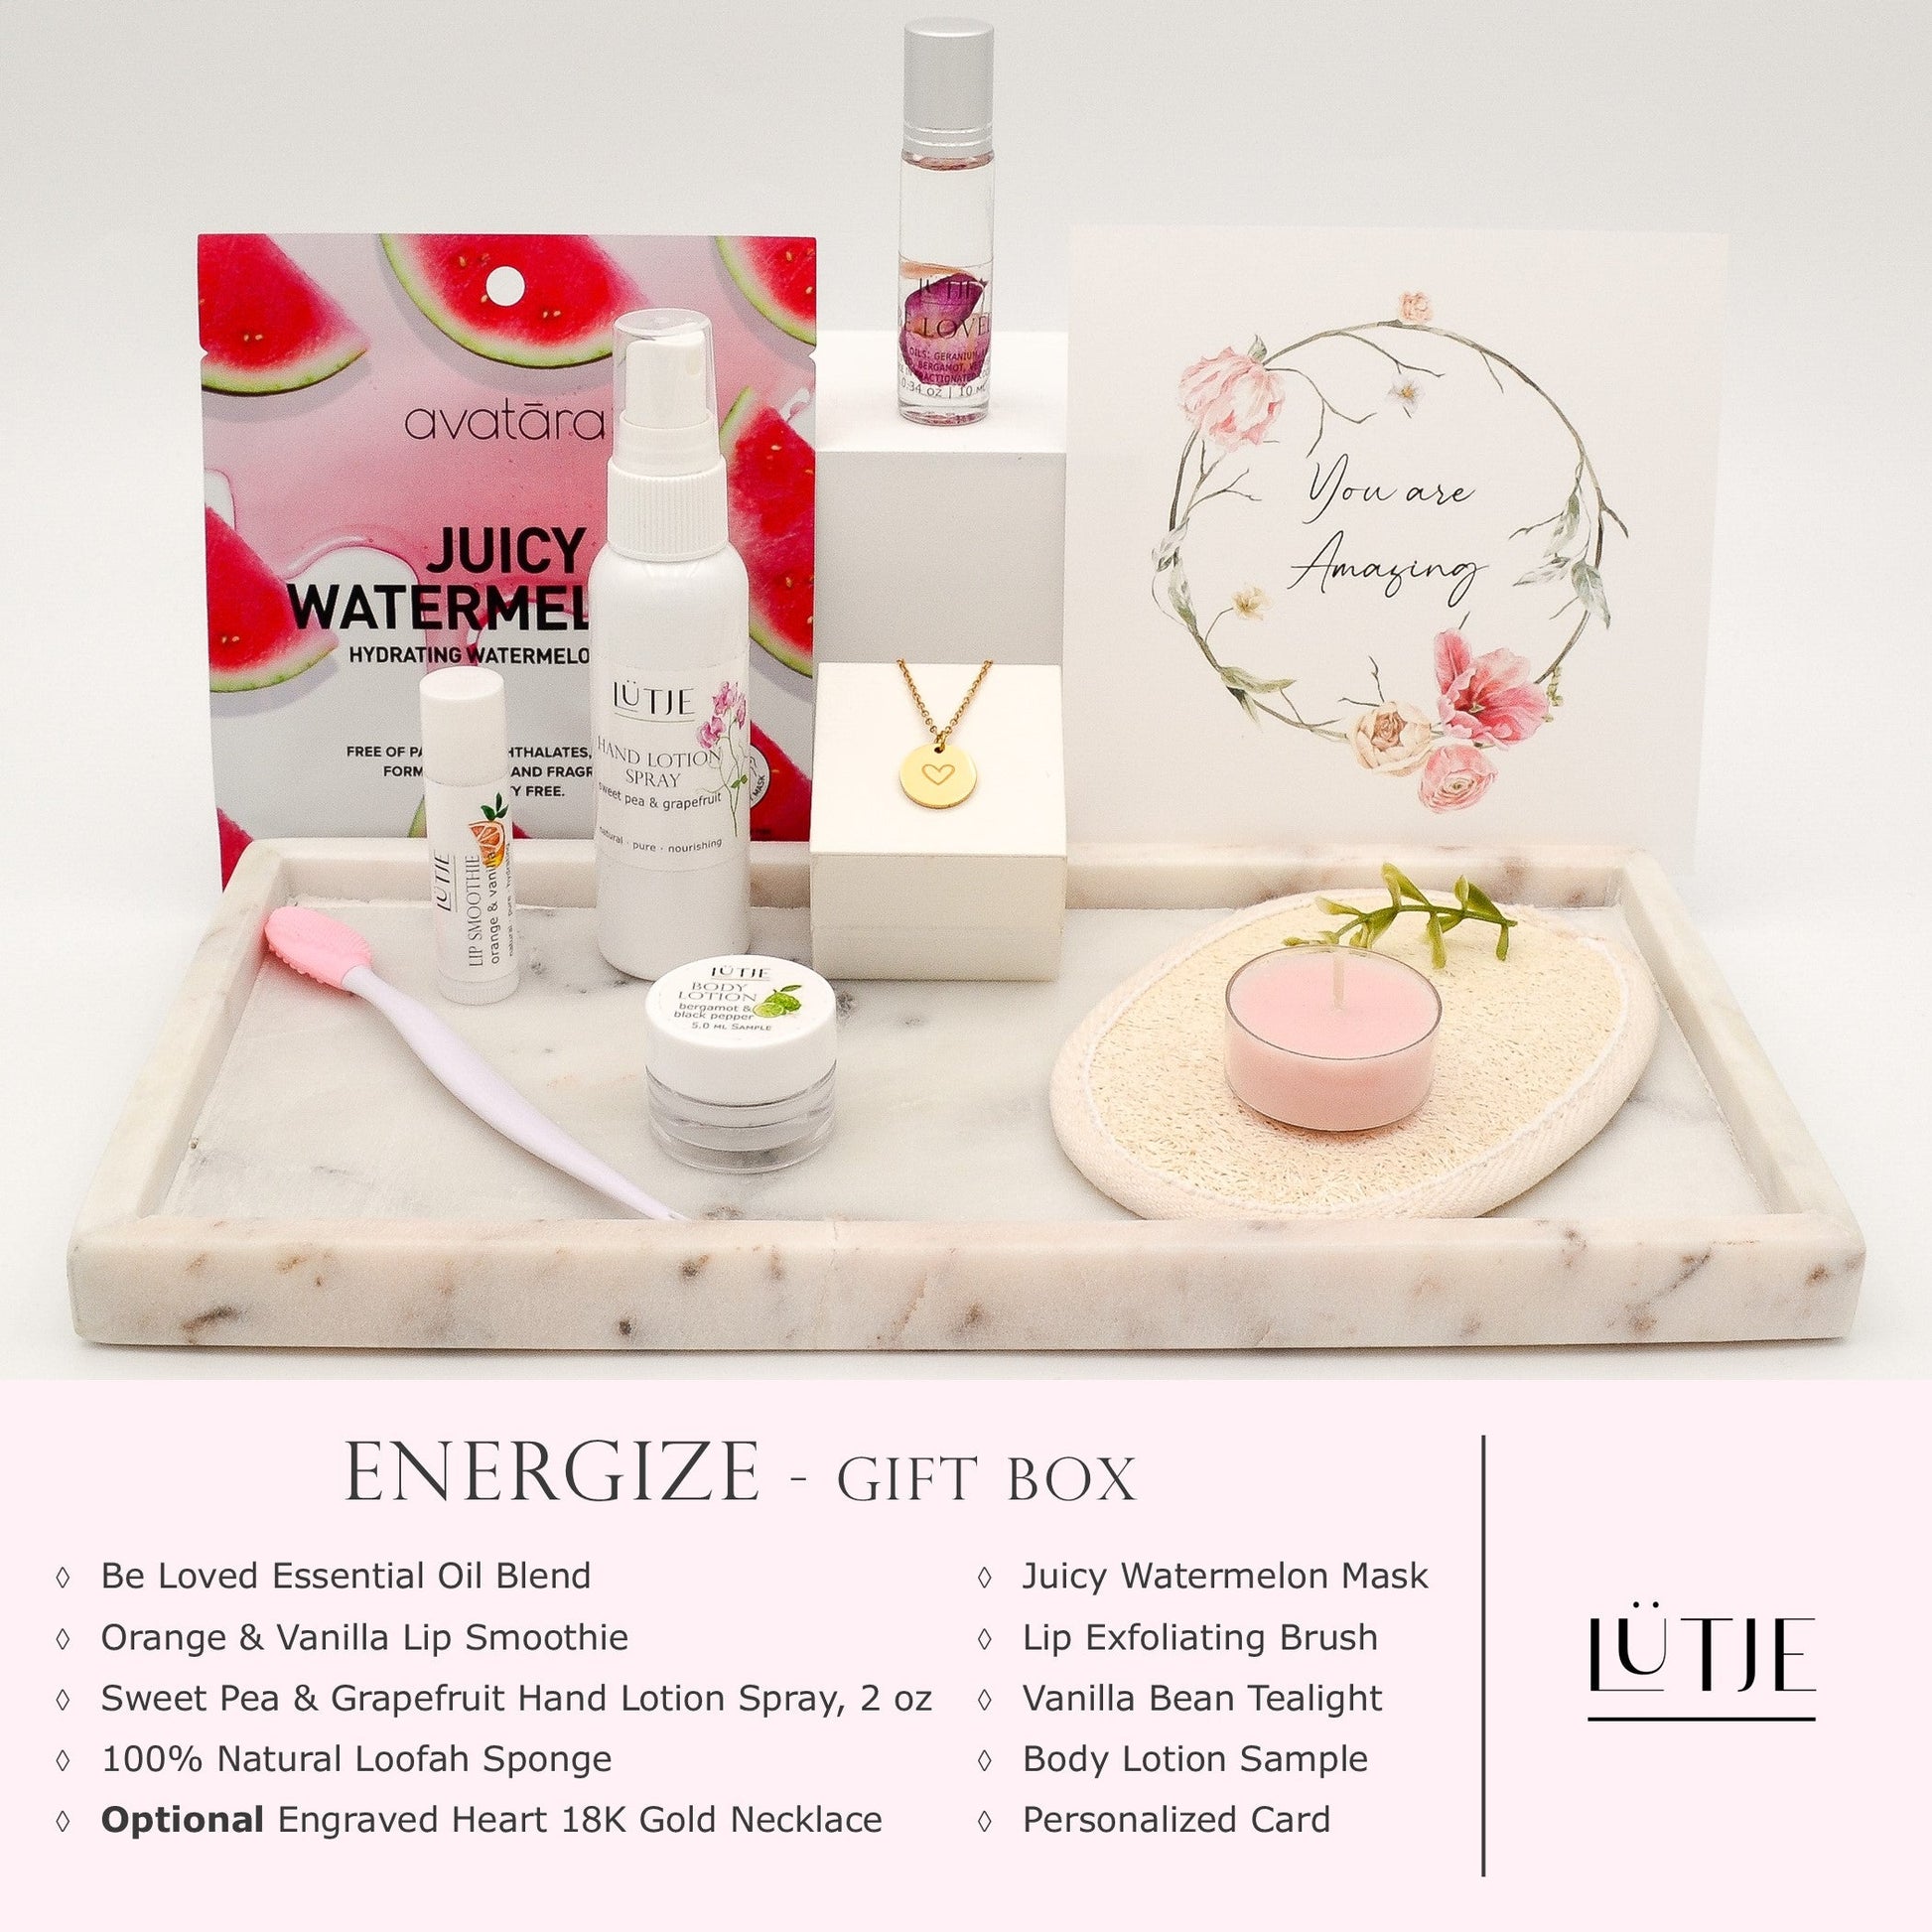 Energize Gift Box for women, BFF, wife, daughter, sister, mom, or grandma, includes Sweet Pea & Grapefruit hand lotion spray, essential oil, lip balm, hydrating face mask, other bath, spa and self-care items, and 18K gold-plated necklace with engraved heart.